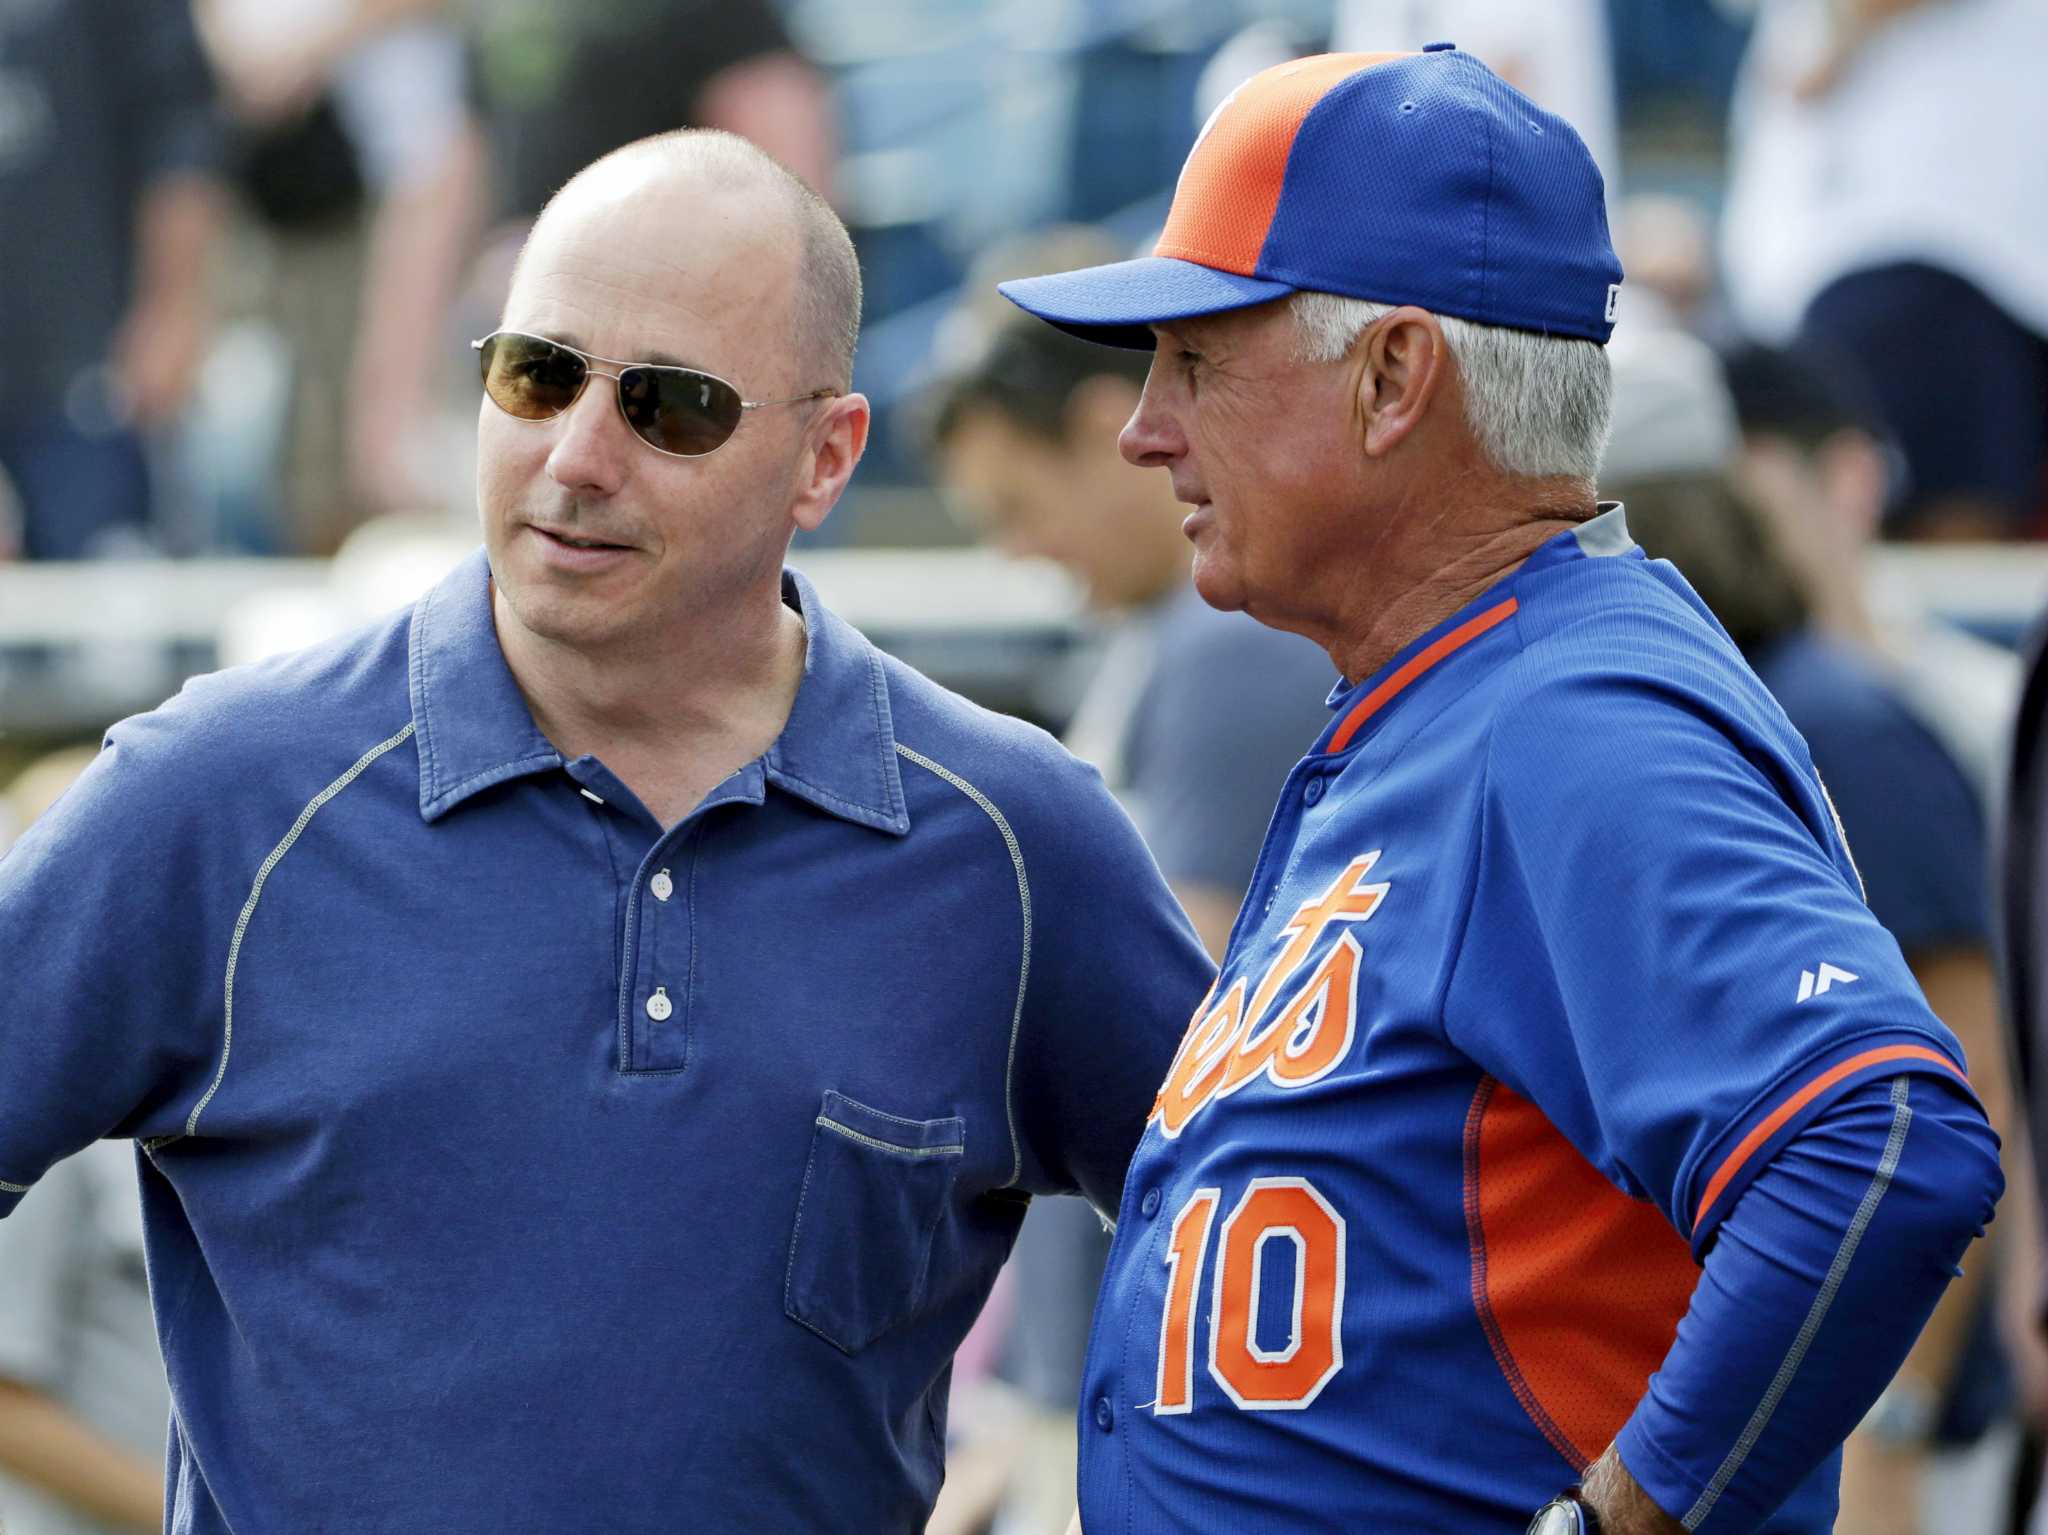 Mattingly offers Wright knowing perspective